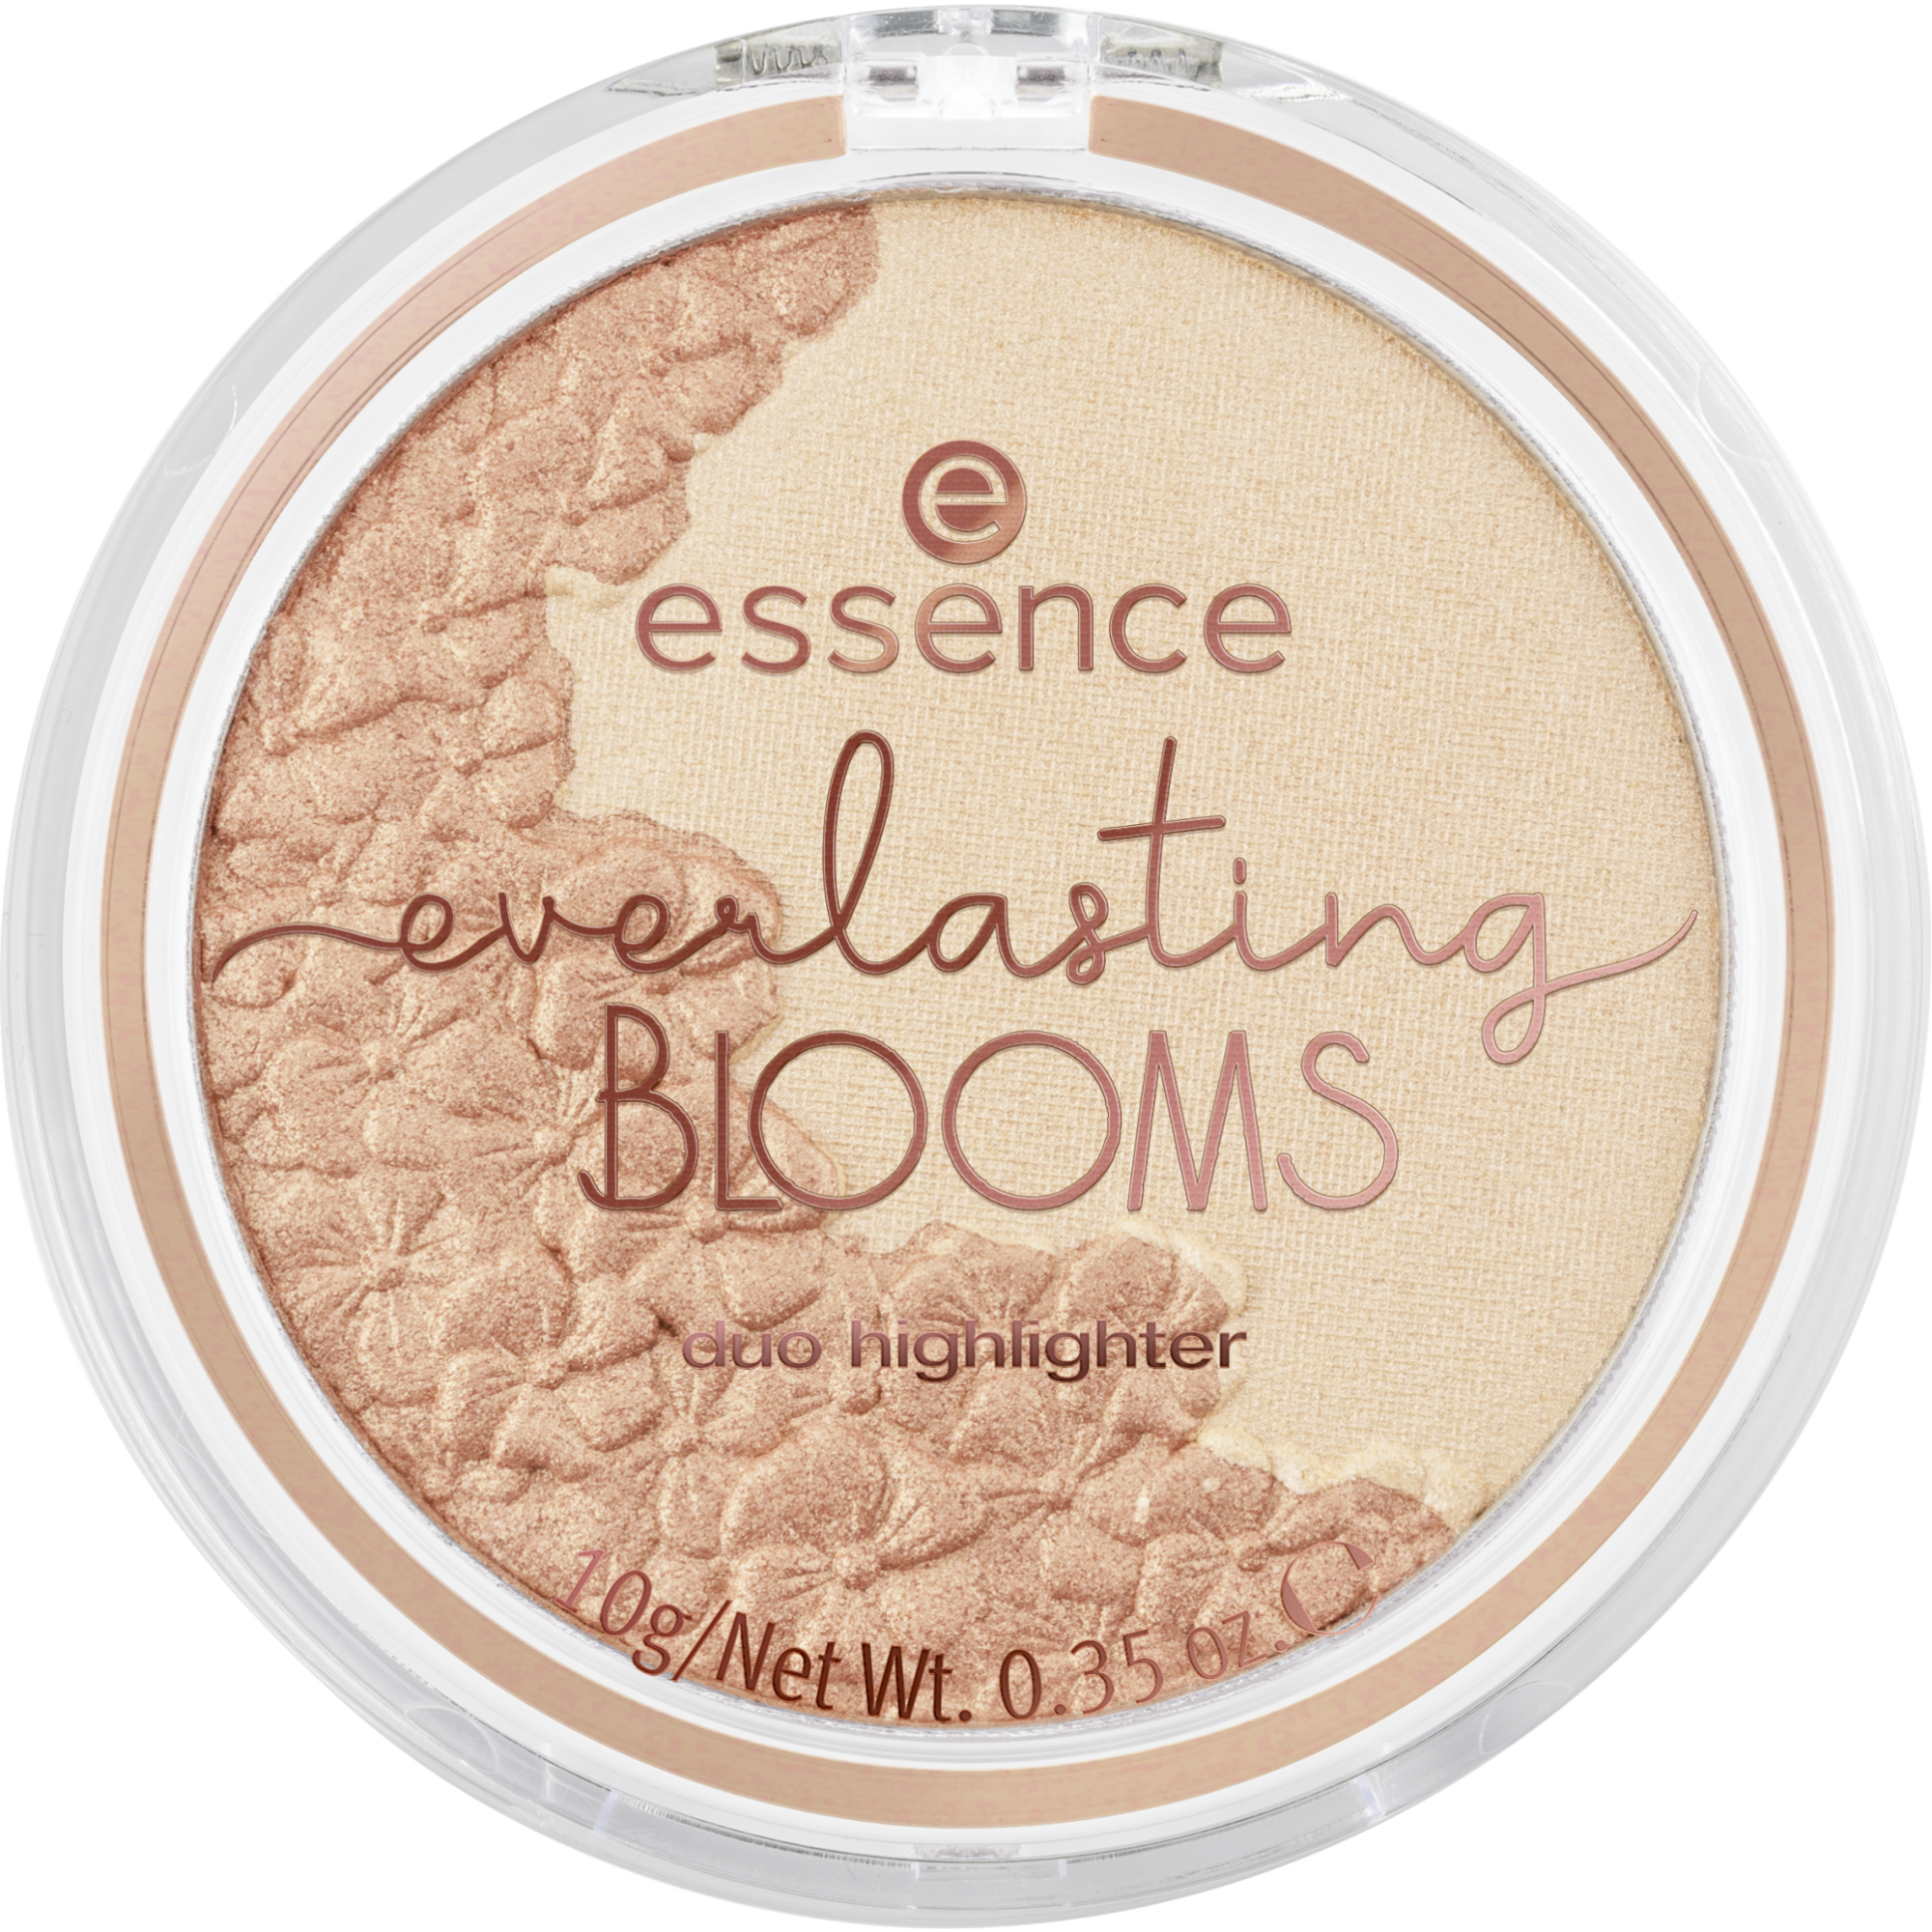 everlasting BLOOMS duo highlighter